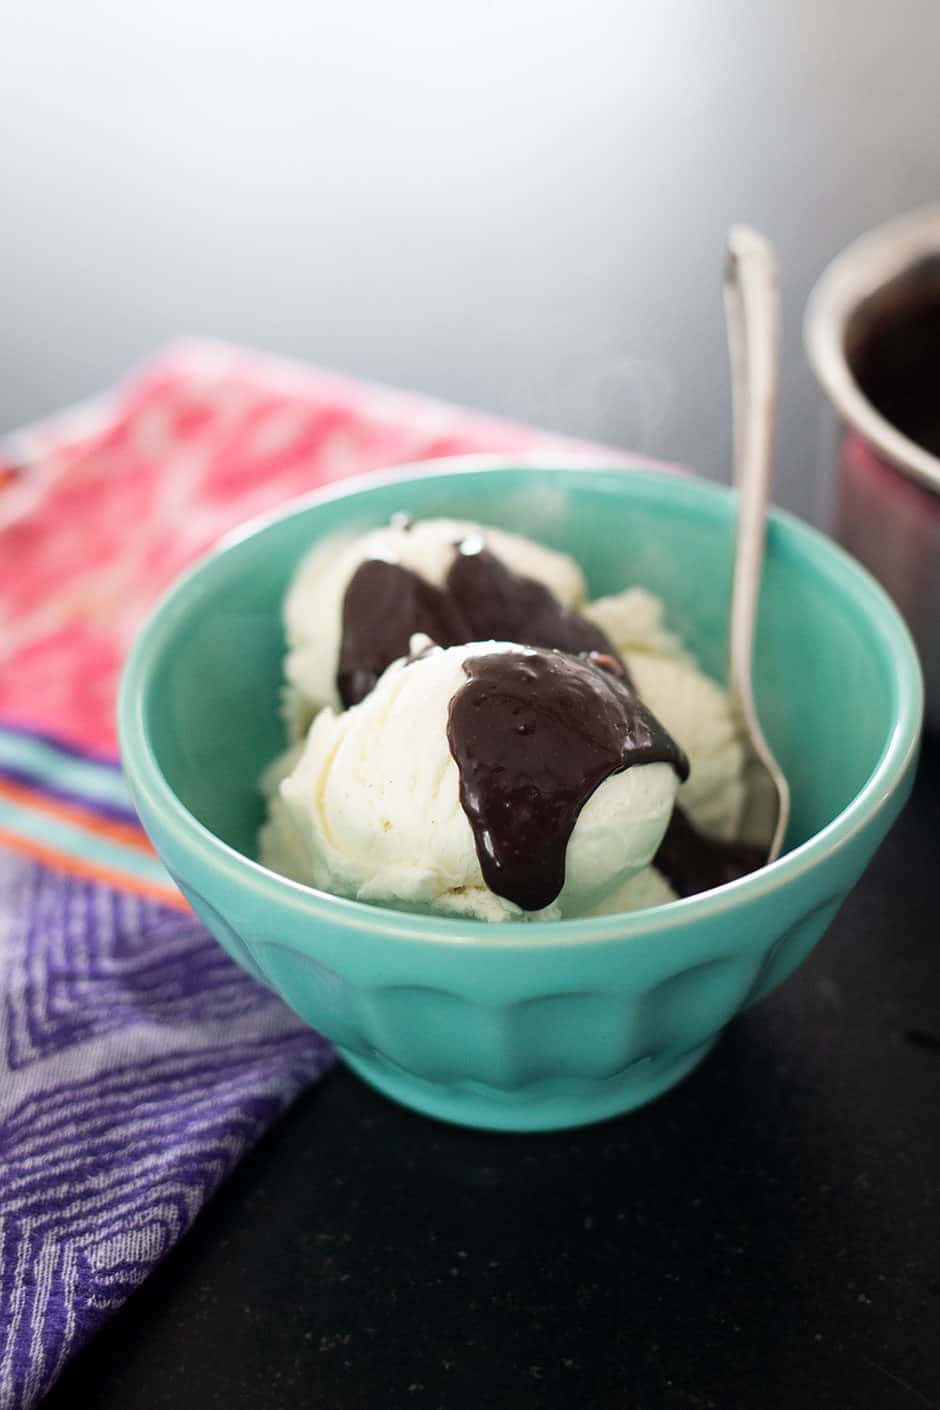 Do you have a go-to hot fudge sauce recipe? This one is decadent, delicious and takes less than 10 minutes to whip up. It really is the world's best hot fudge sauce!